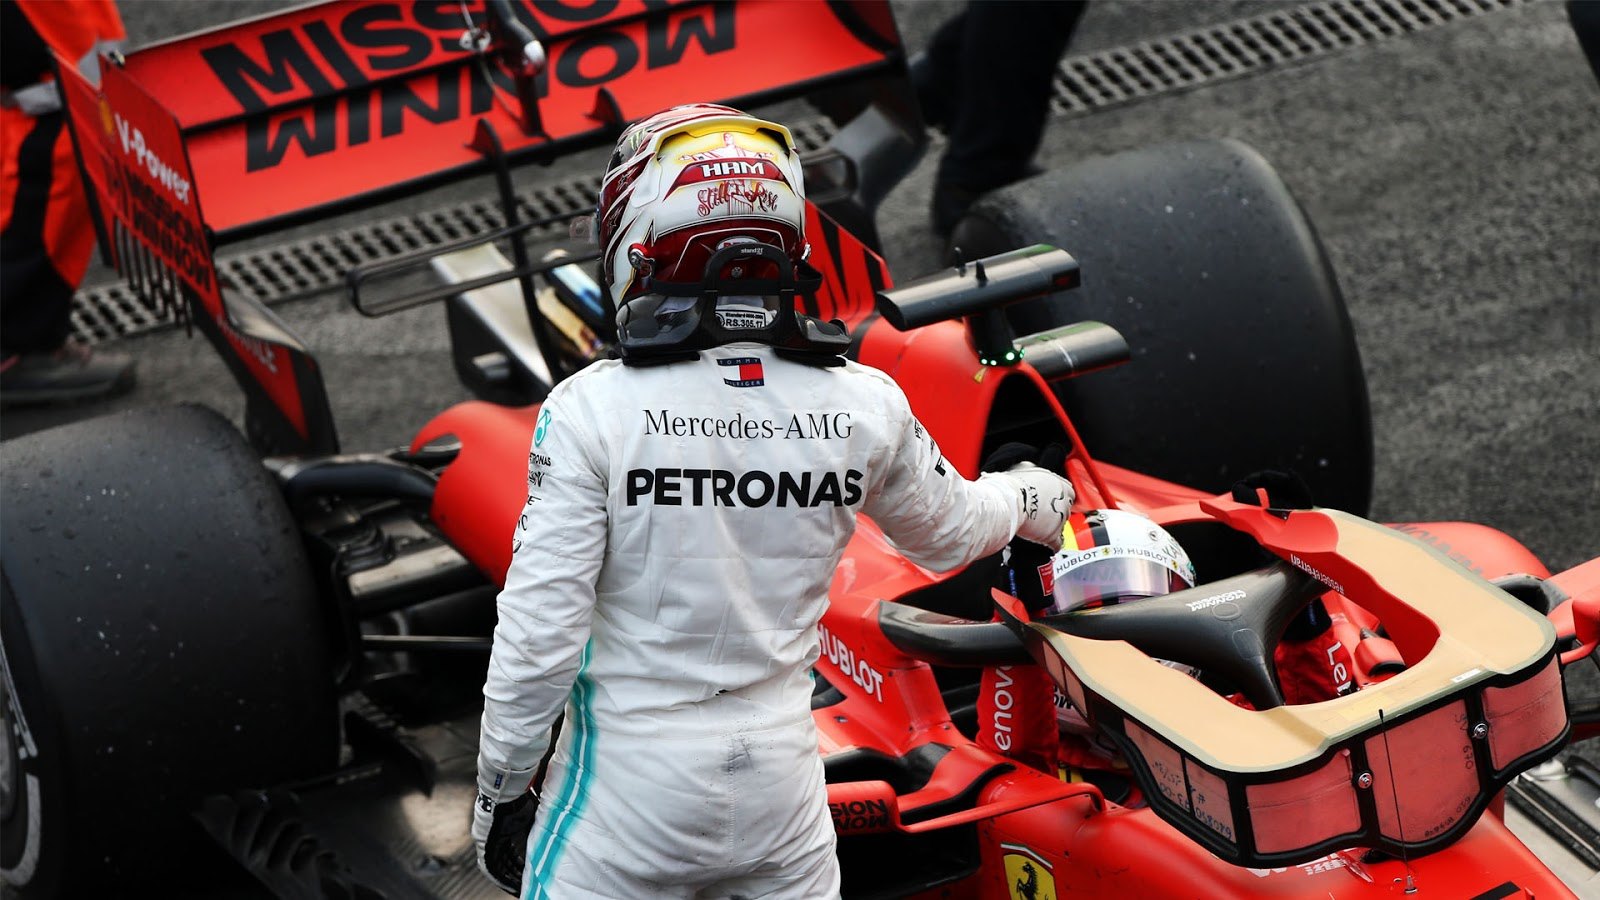 30 Fun Facts That Few People Know About Formula 1